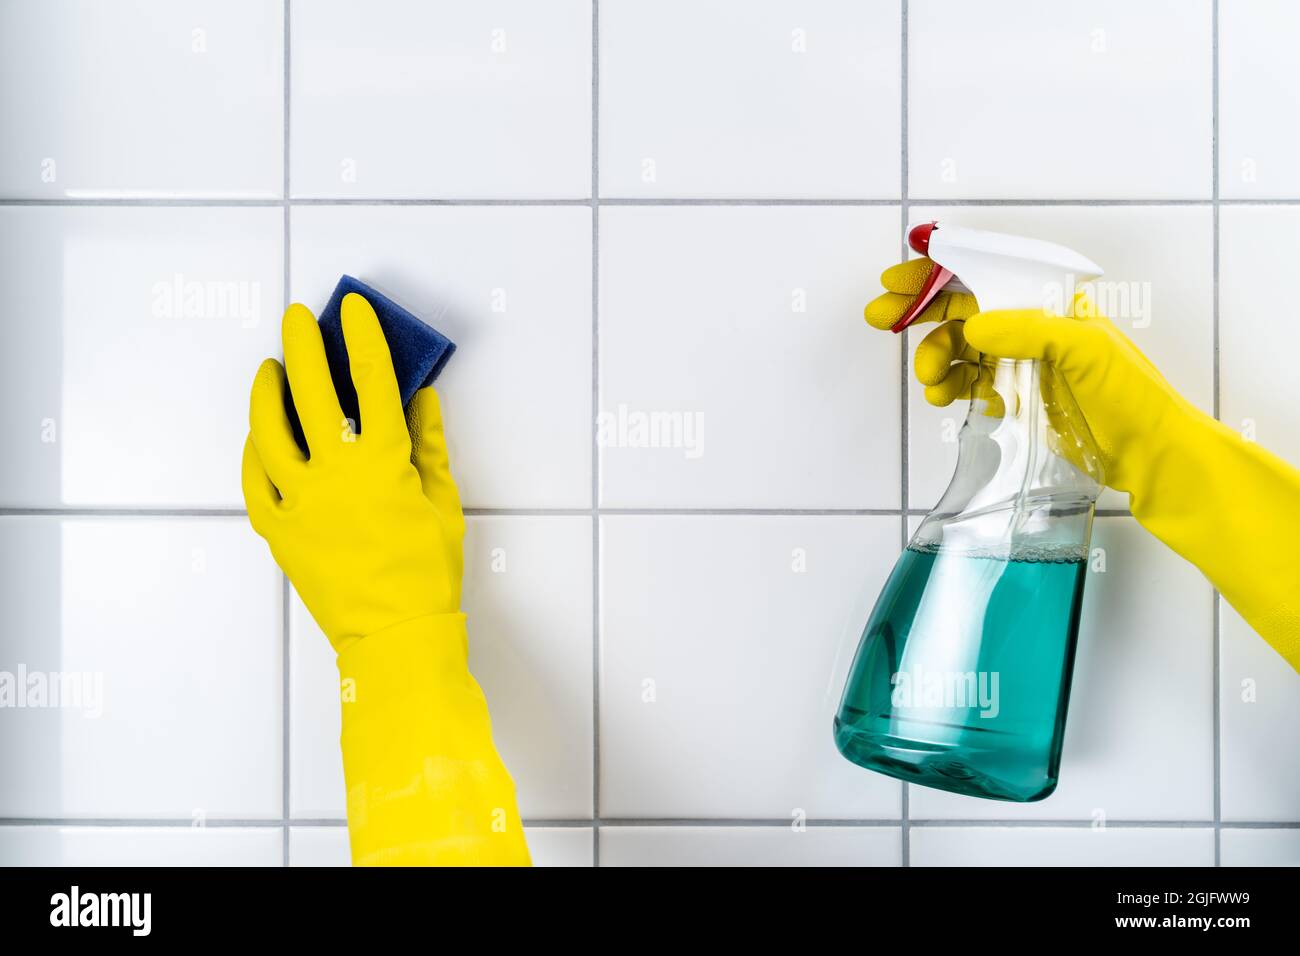 Tile Wall Grout Cleaning With Sponge And Goggles Stock Photo